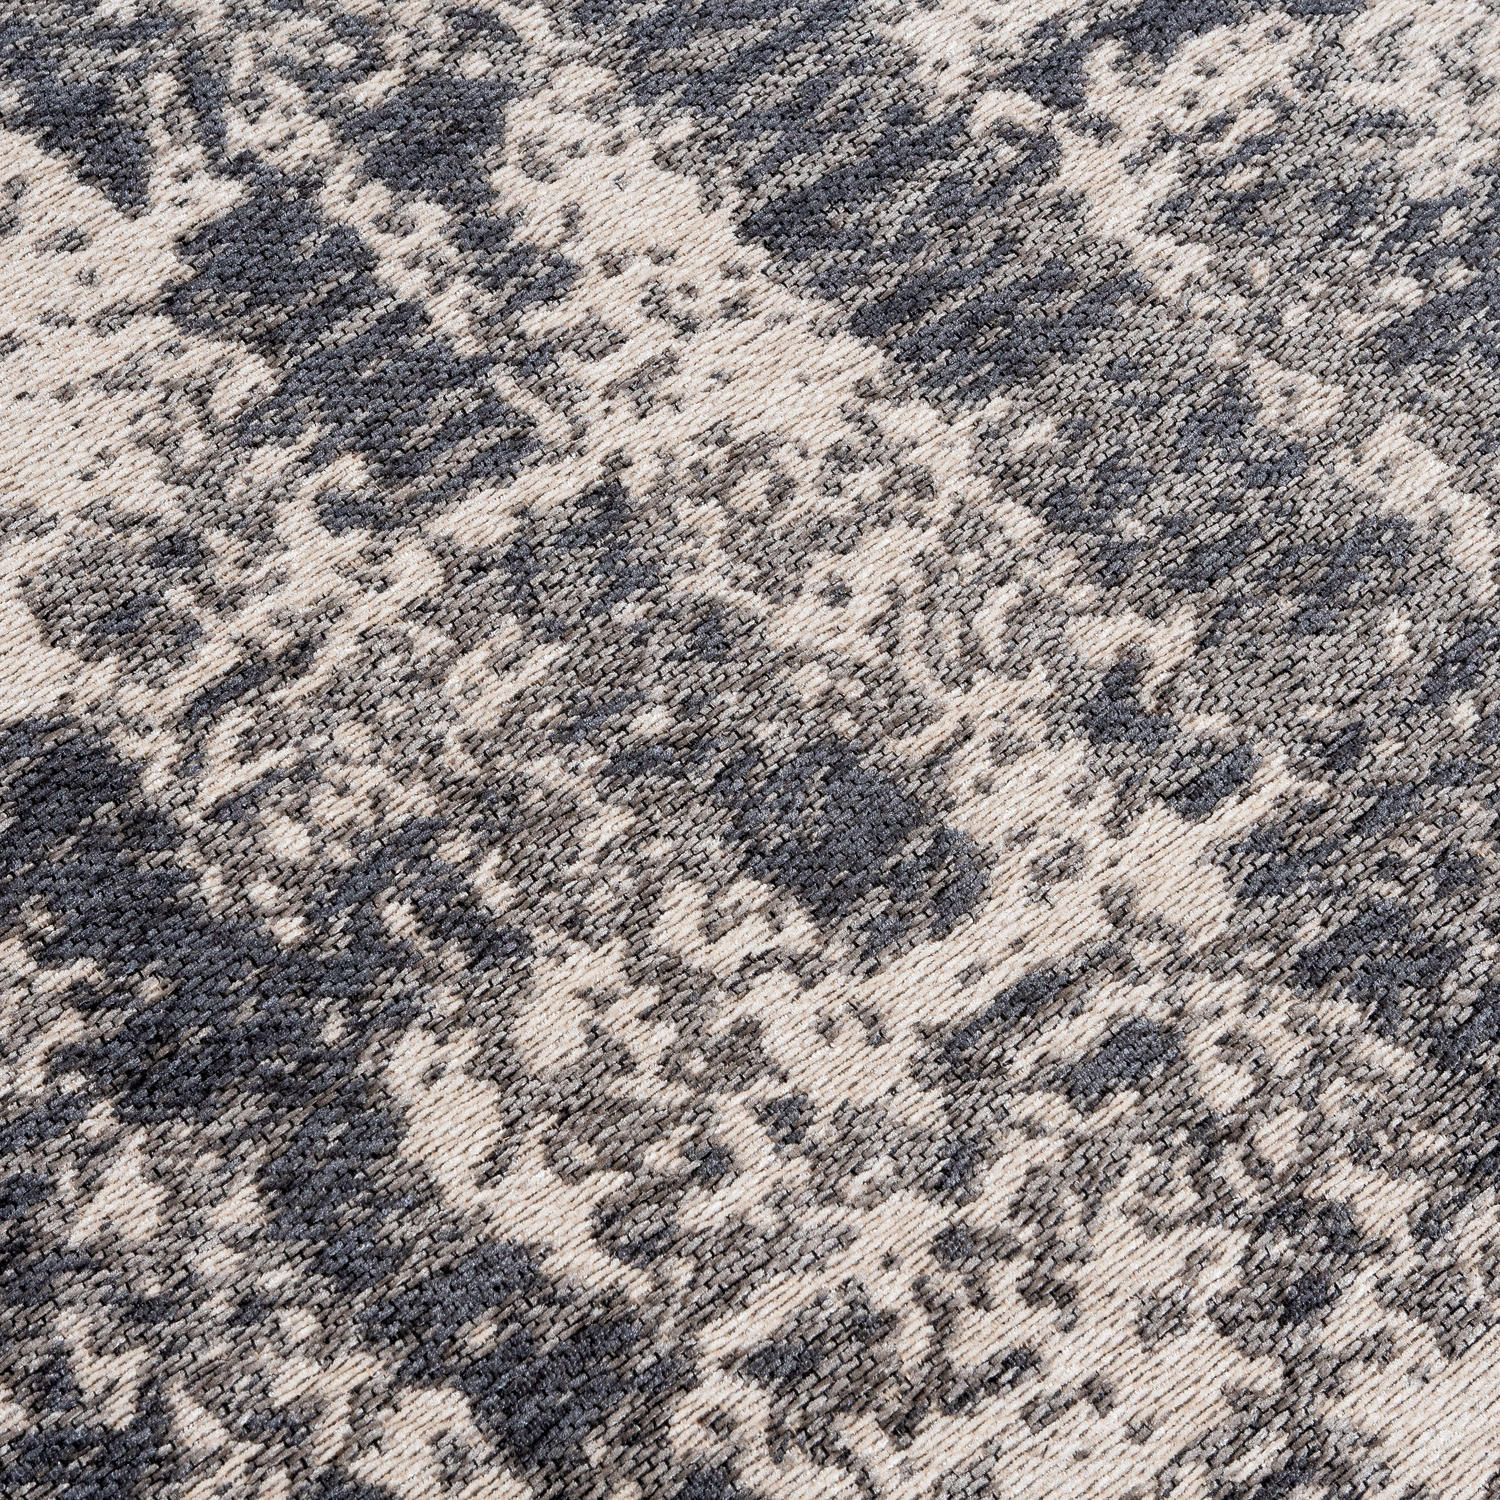 Aria Large Abstract Grey Rug - Image 2